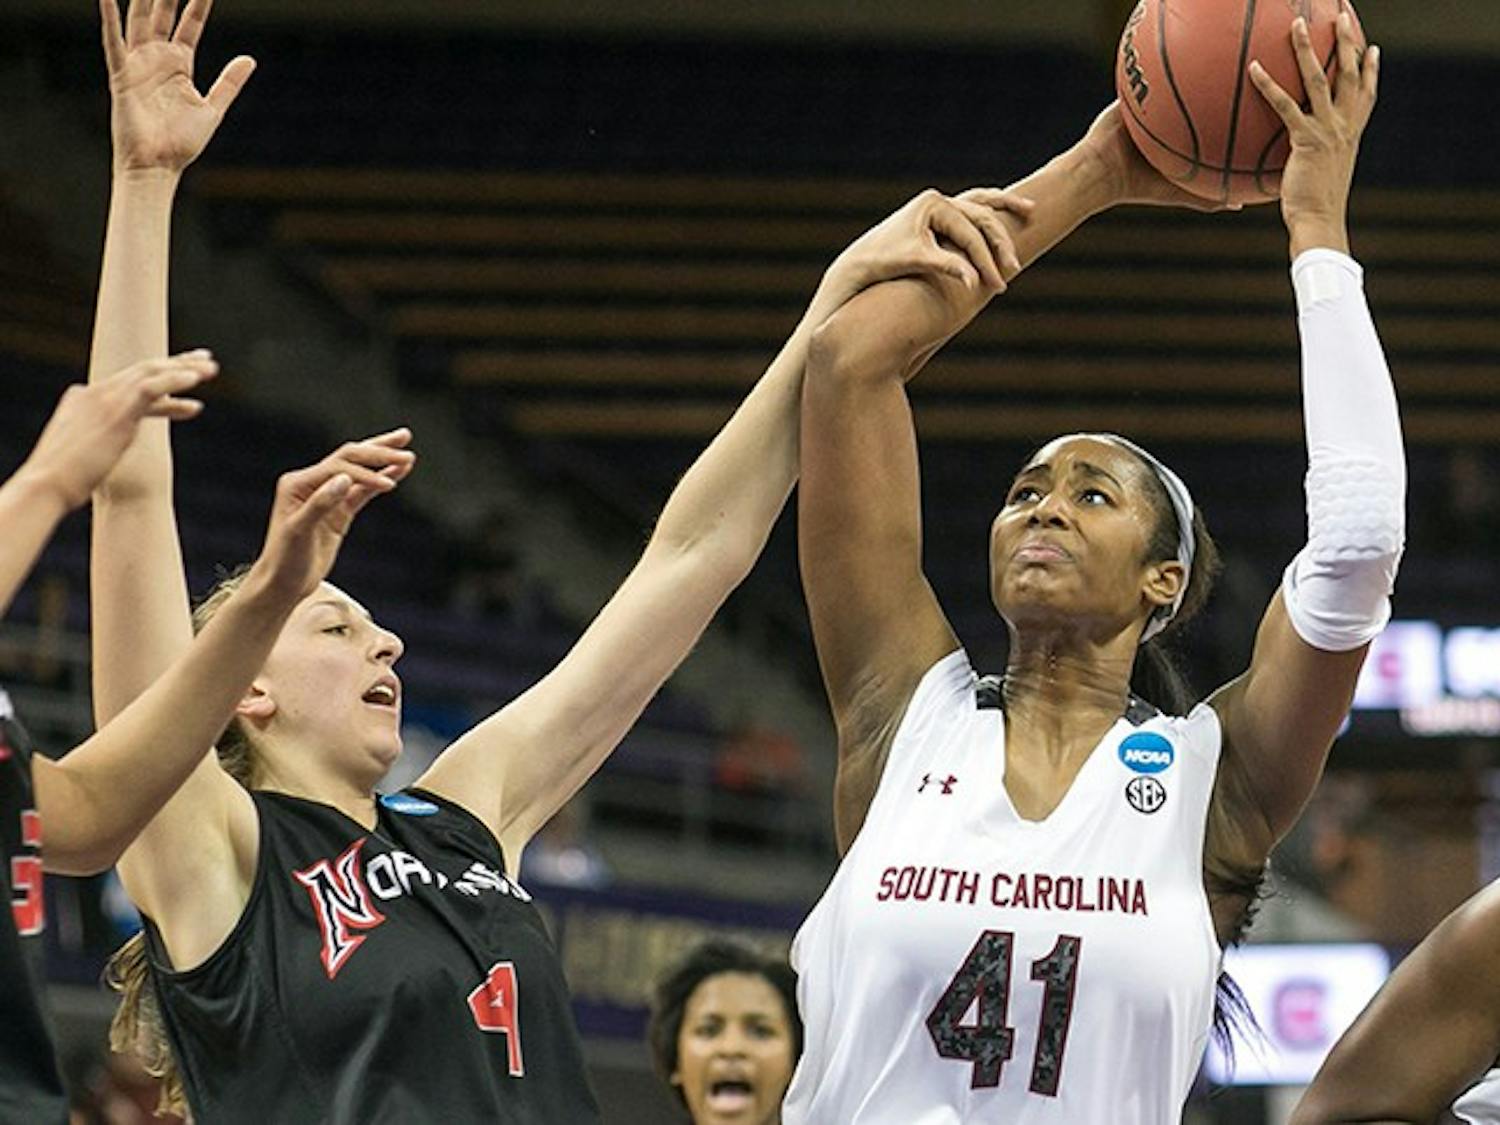 South Carolina&apos;s Alaina Coates (41) gets the rebound and attempts the put back in the second half, but gets fouled by CSU Northridge&apos;s Camille Mahlknecht during the first round of the women&apos;s NCAA Tournament in Seattle on Sunday, March 23, 2014. (Dean Rutz/Seattle Times/MCT)